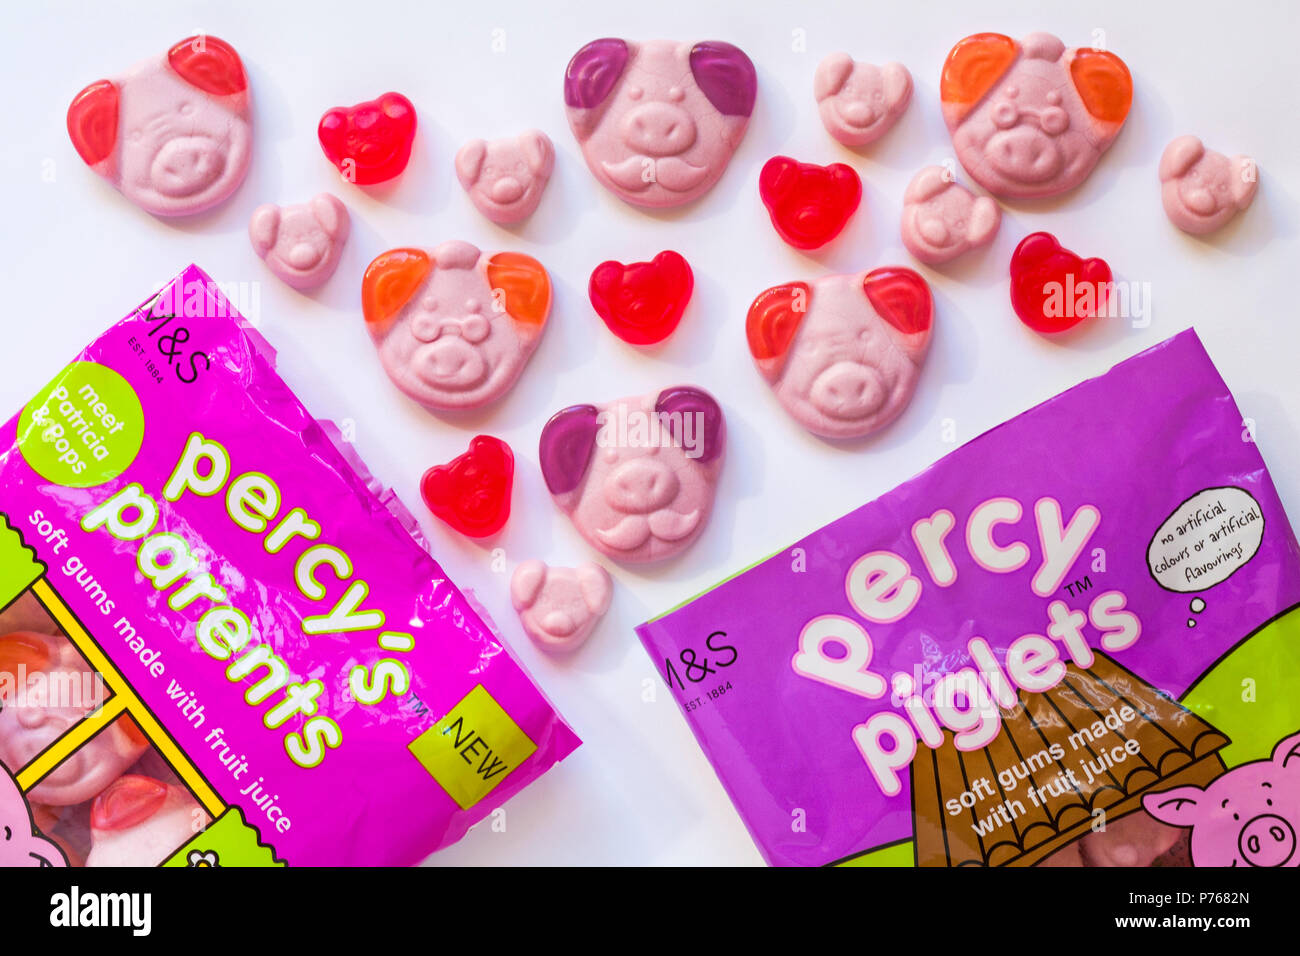 Packets of percy's parents and percy piglets percy pig sweets opened with contents spilled set on white background - soft gums made with fruit juice Stock Photo